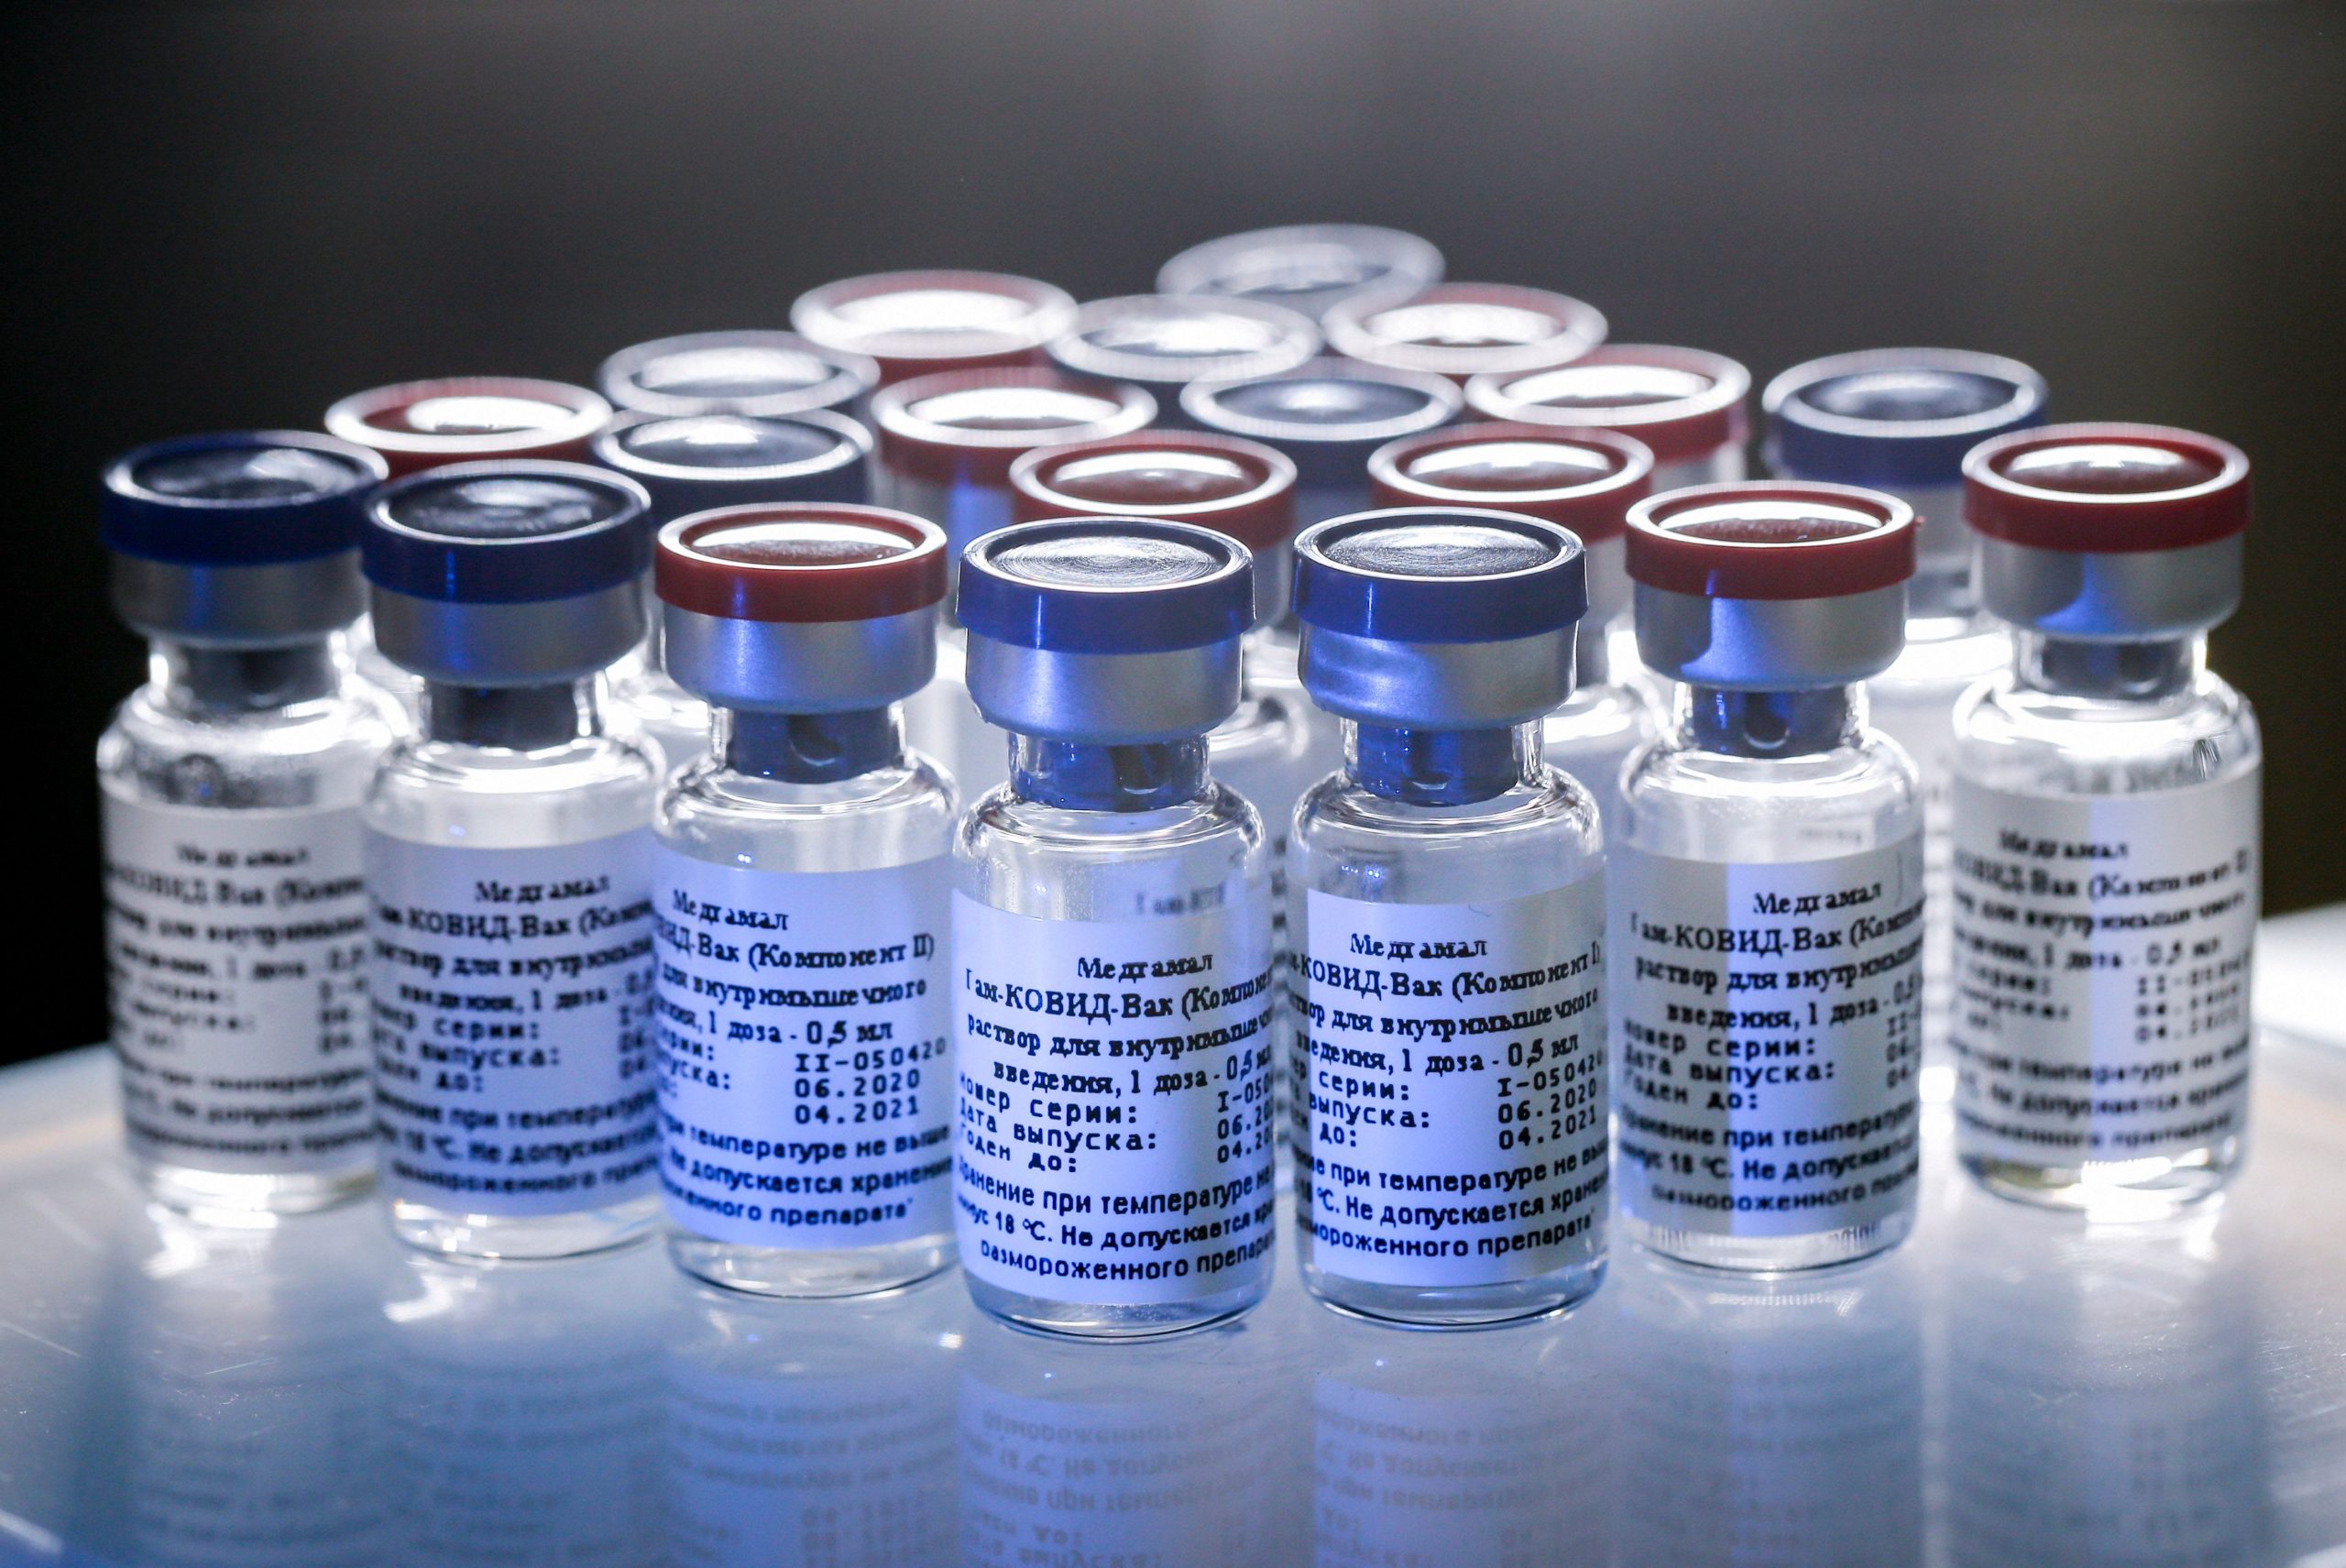 Led by corrupt WHO: US says it will not join global effort to find COVID-19 vaccine